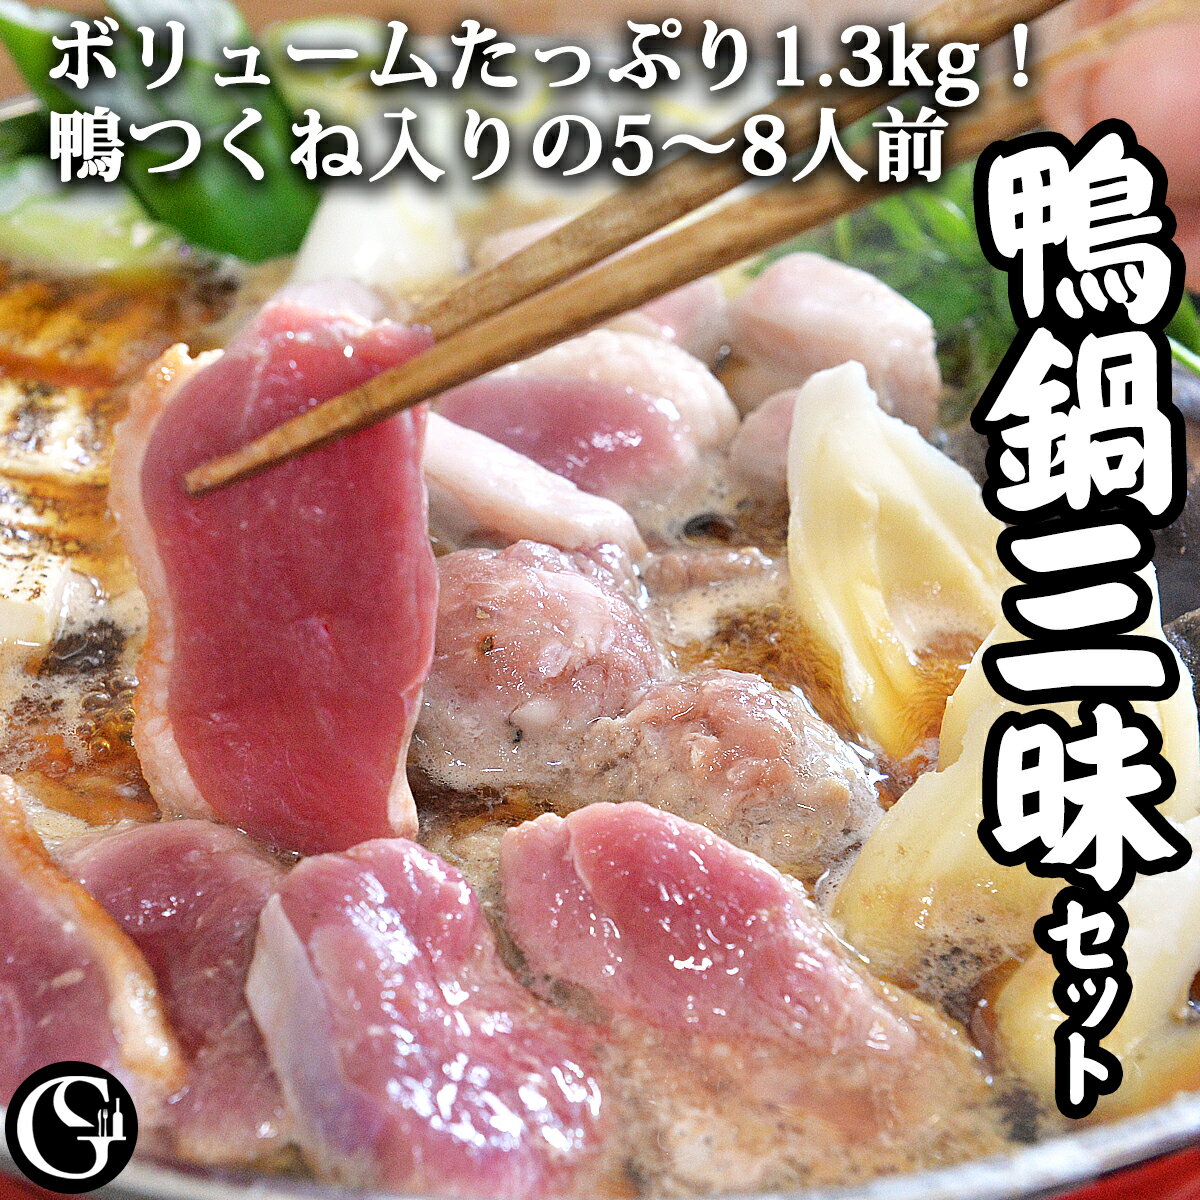 <strong>鴨</strong>なべ 三昧セット（6～8人前）1.3kg（<strong>鴨</strong>つくね が絶品！<strong>鴨</strong>ロース <strong>鴨</strong>モモ <strong>鴨</strong>つくね で1.3kg <strong>鴨</strong>焼き も絶品！グルメソムリエ <strong>鴨</strong>鍋 ギフト【送料無料】【冷凍】